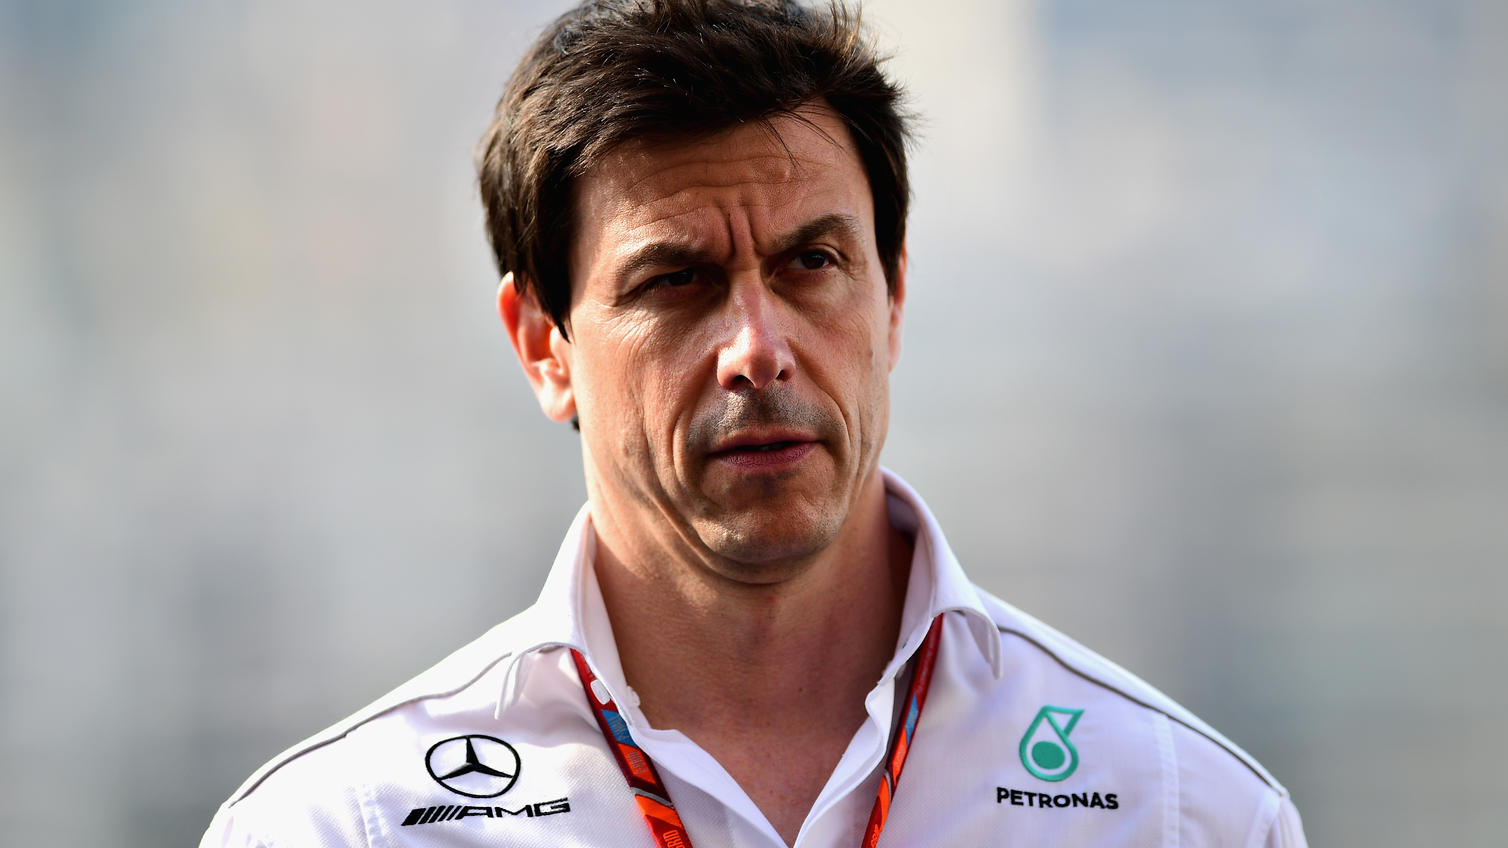 MONTE-CARLO, MONACO - MAY 25: Mercedes GP Executive Director Toto Wolff walks in the Paddock during practice for the Monaco Formula One Grand Prix at Circuit de Monaco on May 25, 2017 in Monte-Carlo, Monaco.  (Photo by Shaun Botterill/Getty Images)